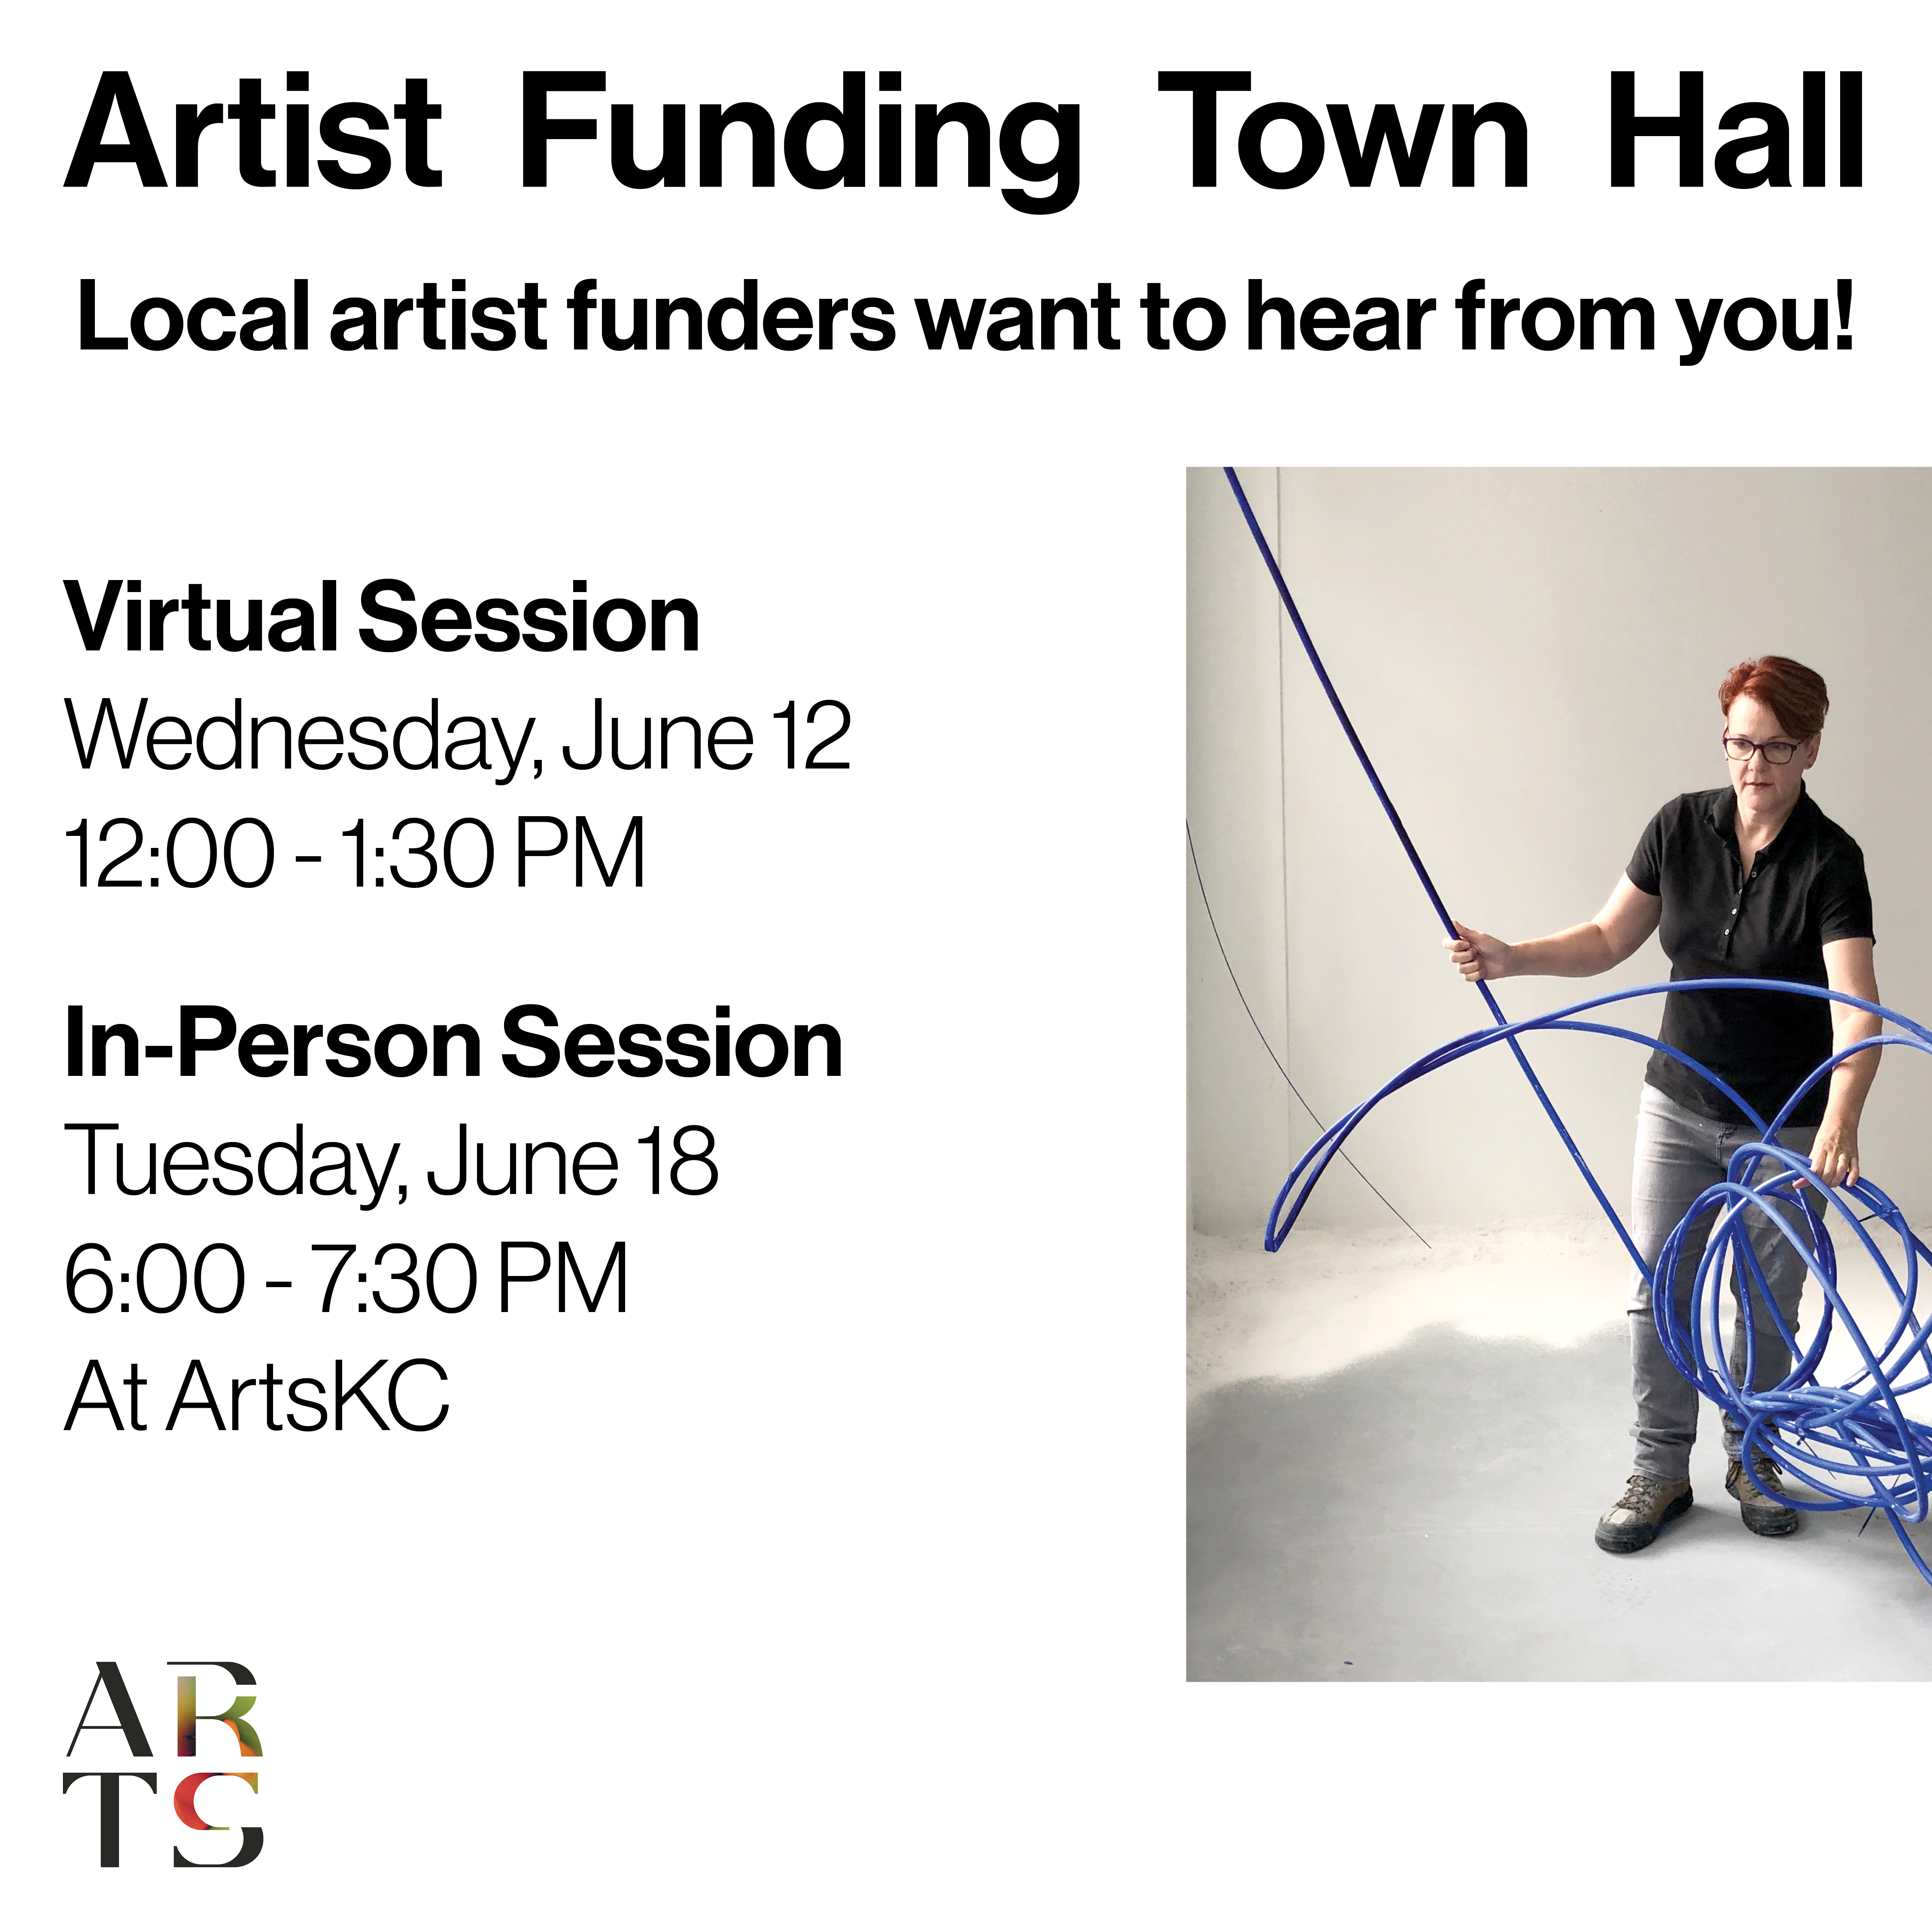 “Join us for an Artist Funding Town Hall presented by ArtsKC. Learn about funding opportunities for artists and provide feedback on regional programs. Presenting organizations include ArtsKC, Charlotte Street, Arts Council of Johnson County, Troost39 Thrift Store, and Mid America Arts Alliance. Organizations will use this feedback to continually improve our funding processes and ensure they are meeting community needs! There are two sessions; one virtually and one in-person: Virtual Session: Wednesday, June 12th 12:00 - 1:30 PM via Zoom In-person Session: Tuesday, June 18th 6:00 - 7:30 PM at ArtsKC, 106 Southwest Blvd. KCMO 64108.